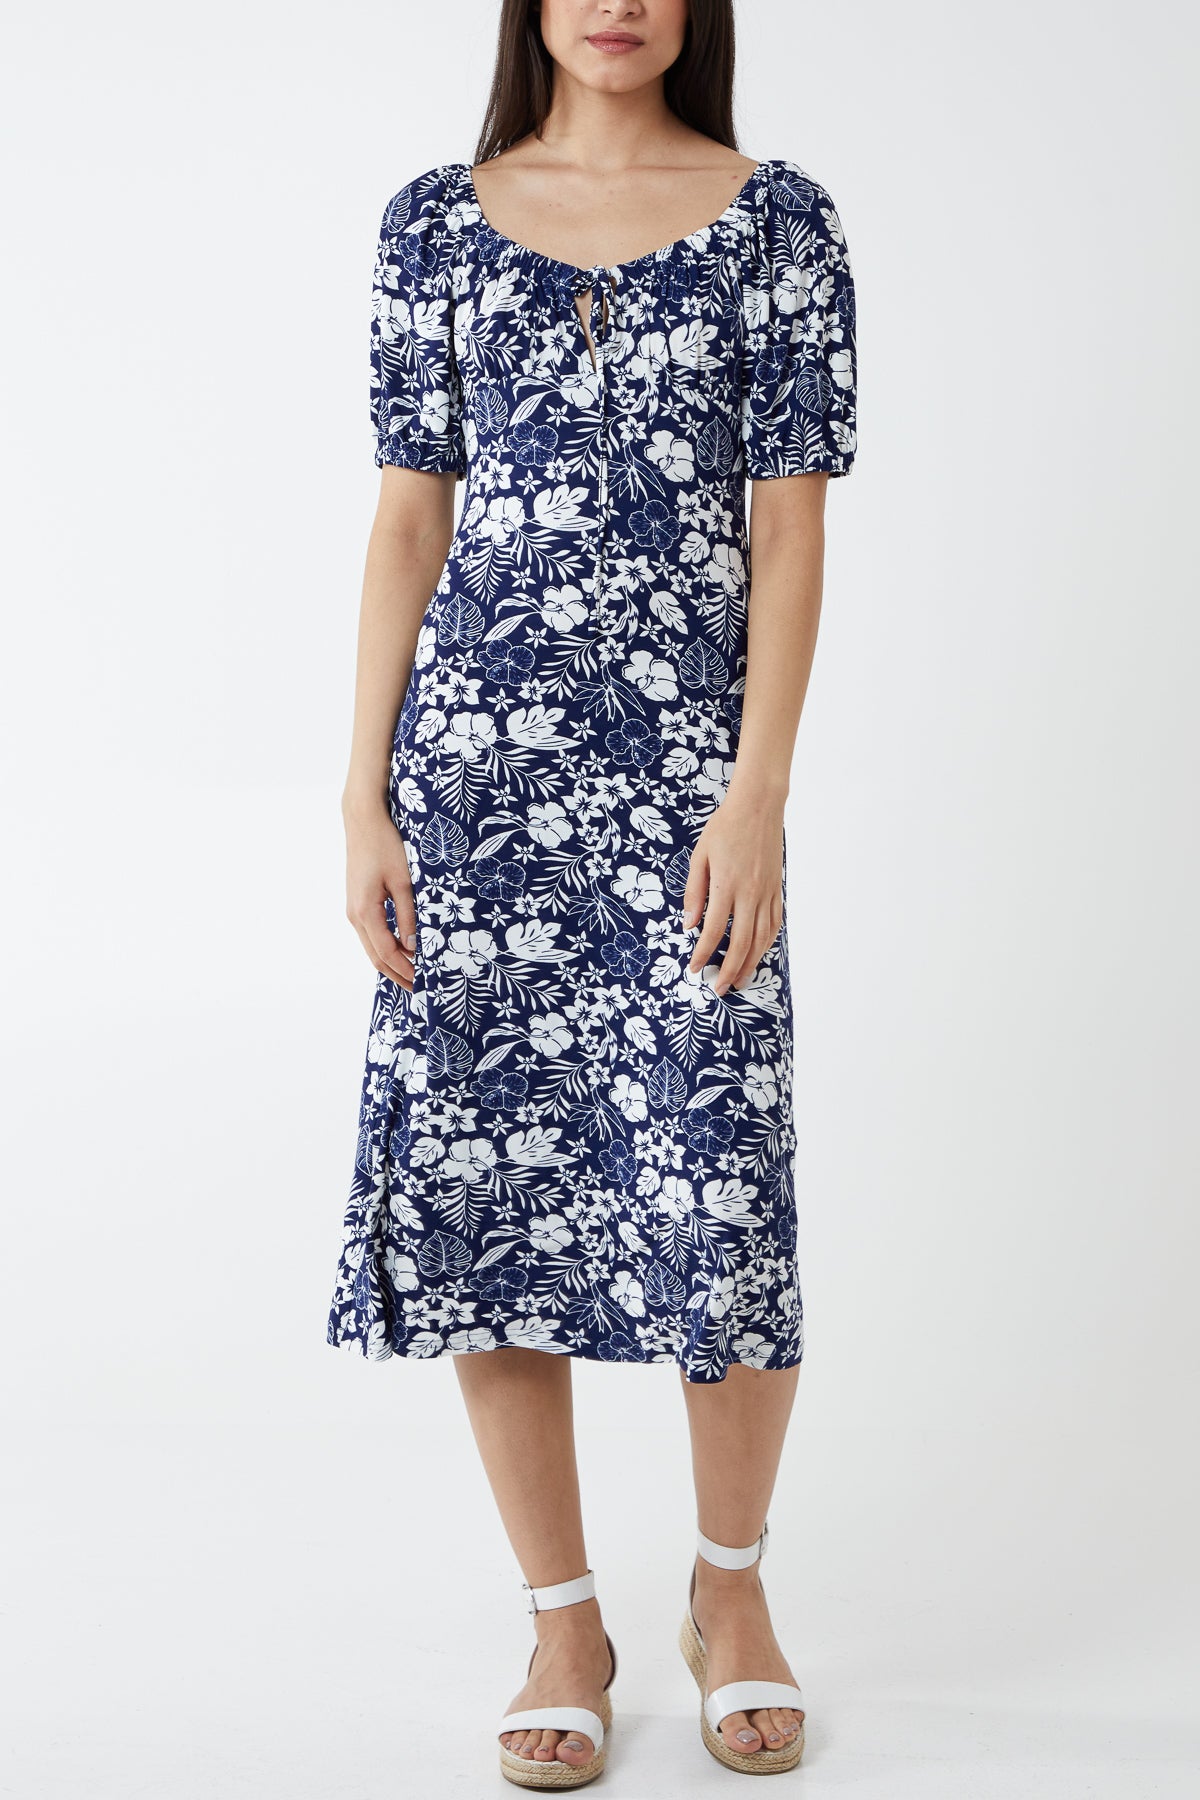 Recycled Yarn Stretch Crepe Elasticated Detail Floral Midi Dress